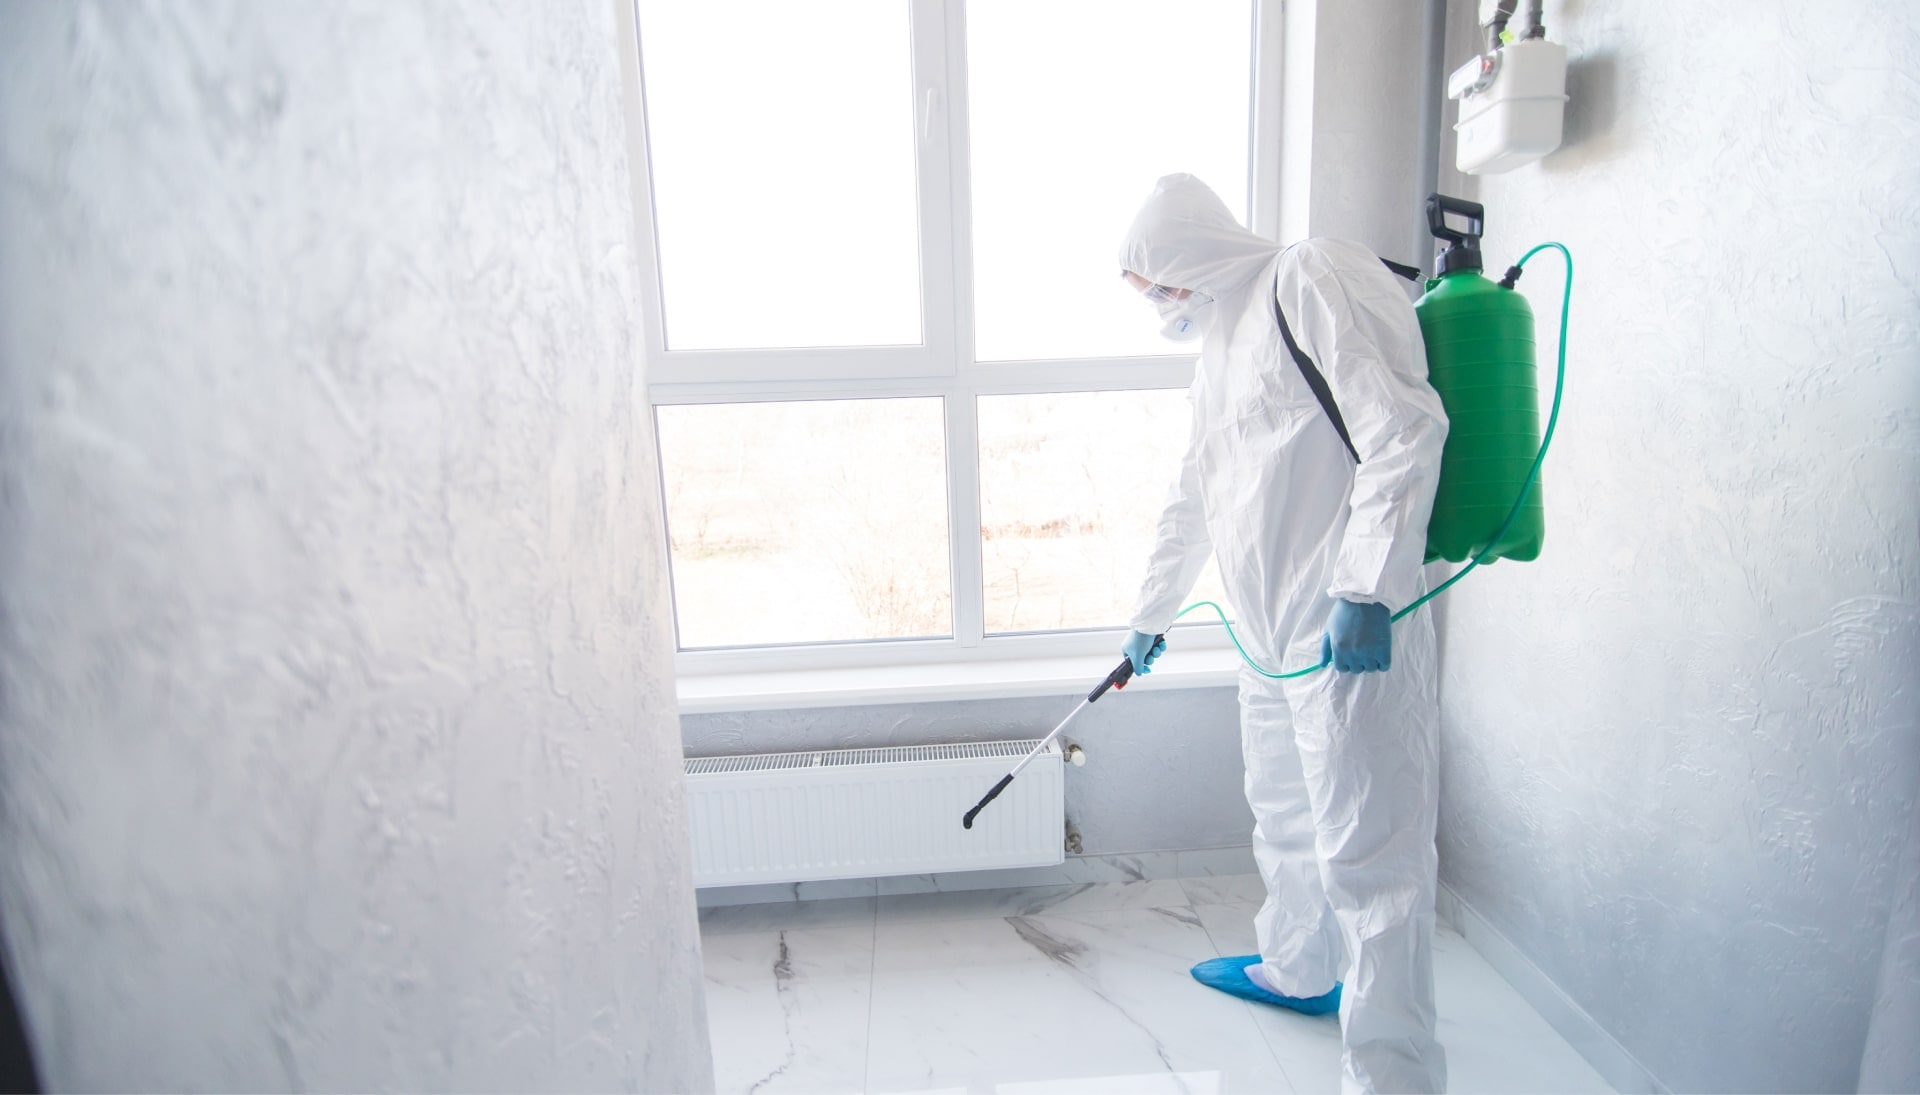 We provide the highest-quality mold inspection, testing, and removal services in the Dayton, Ohio area.